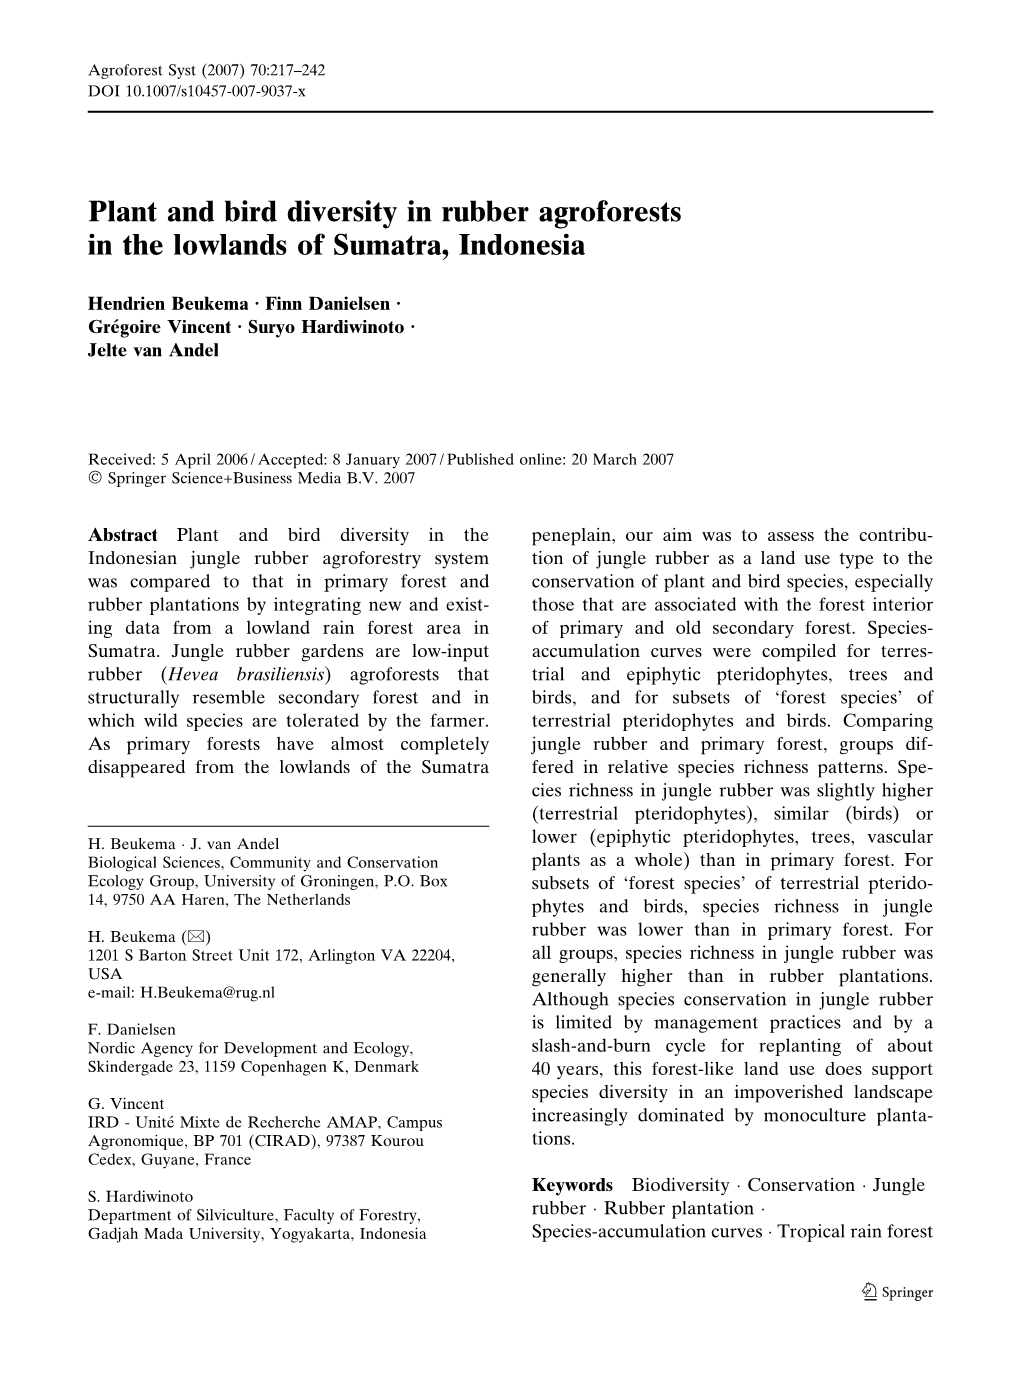 Plant and Bird Diversity in Rubber Agroforests in the Lowlands of Sumatra, Indonesia